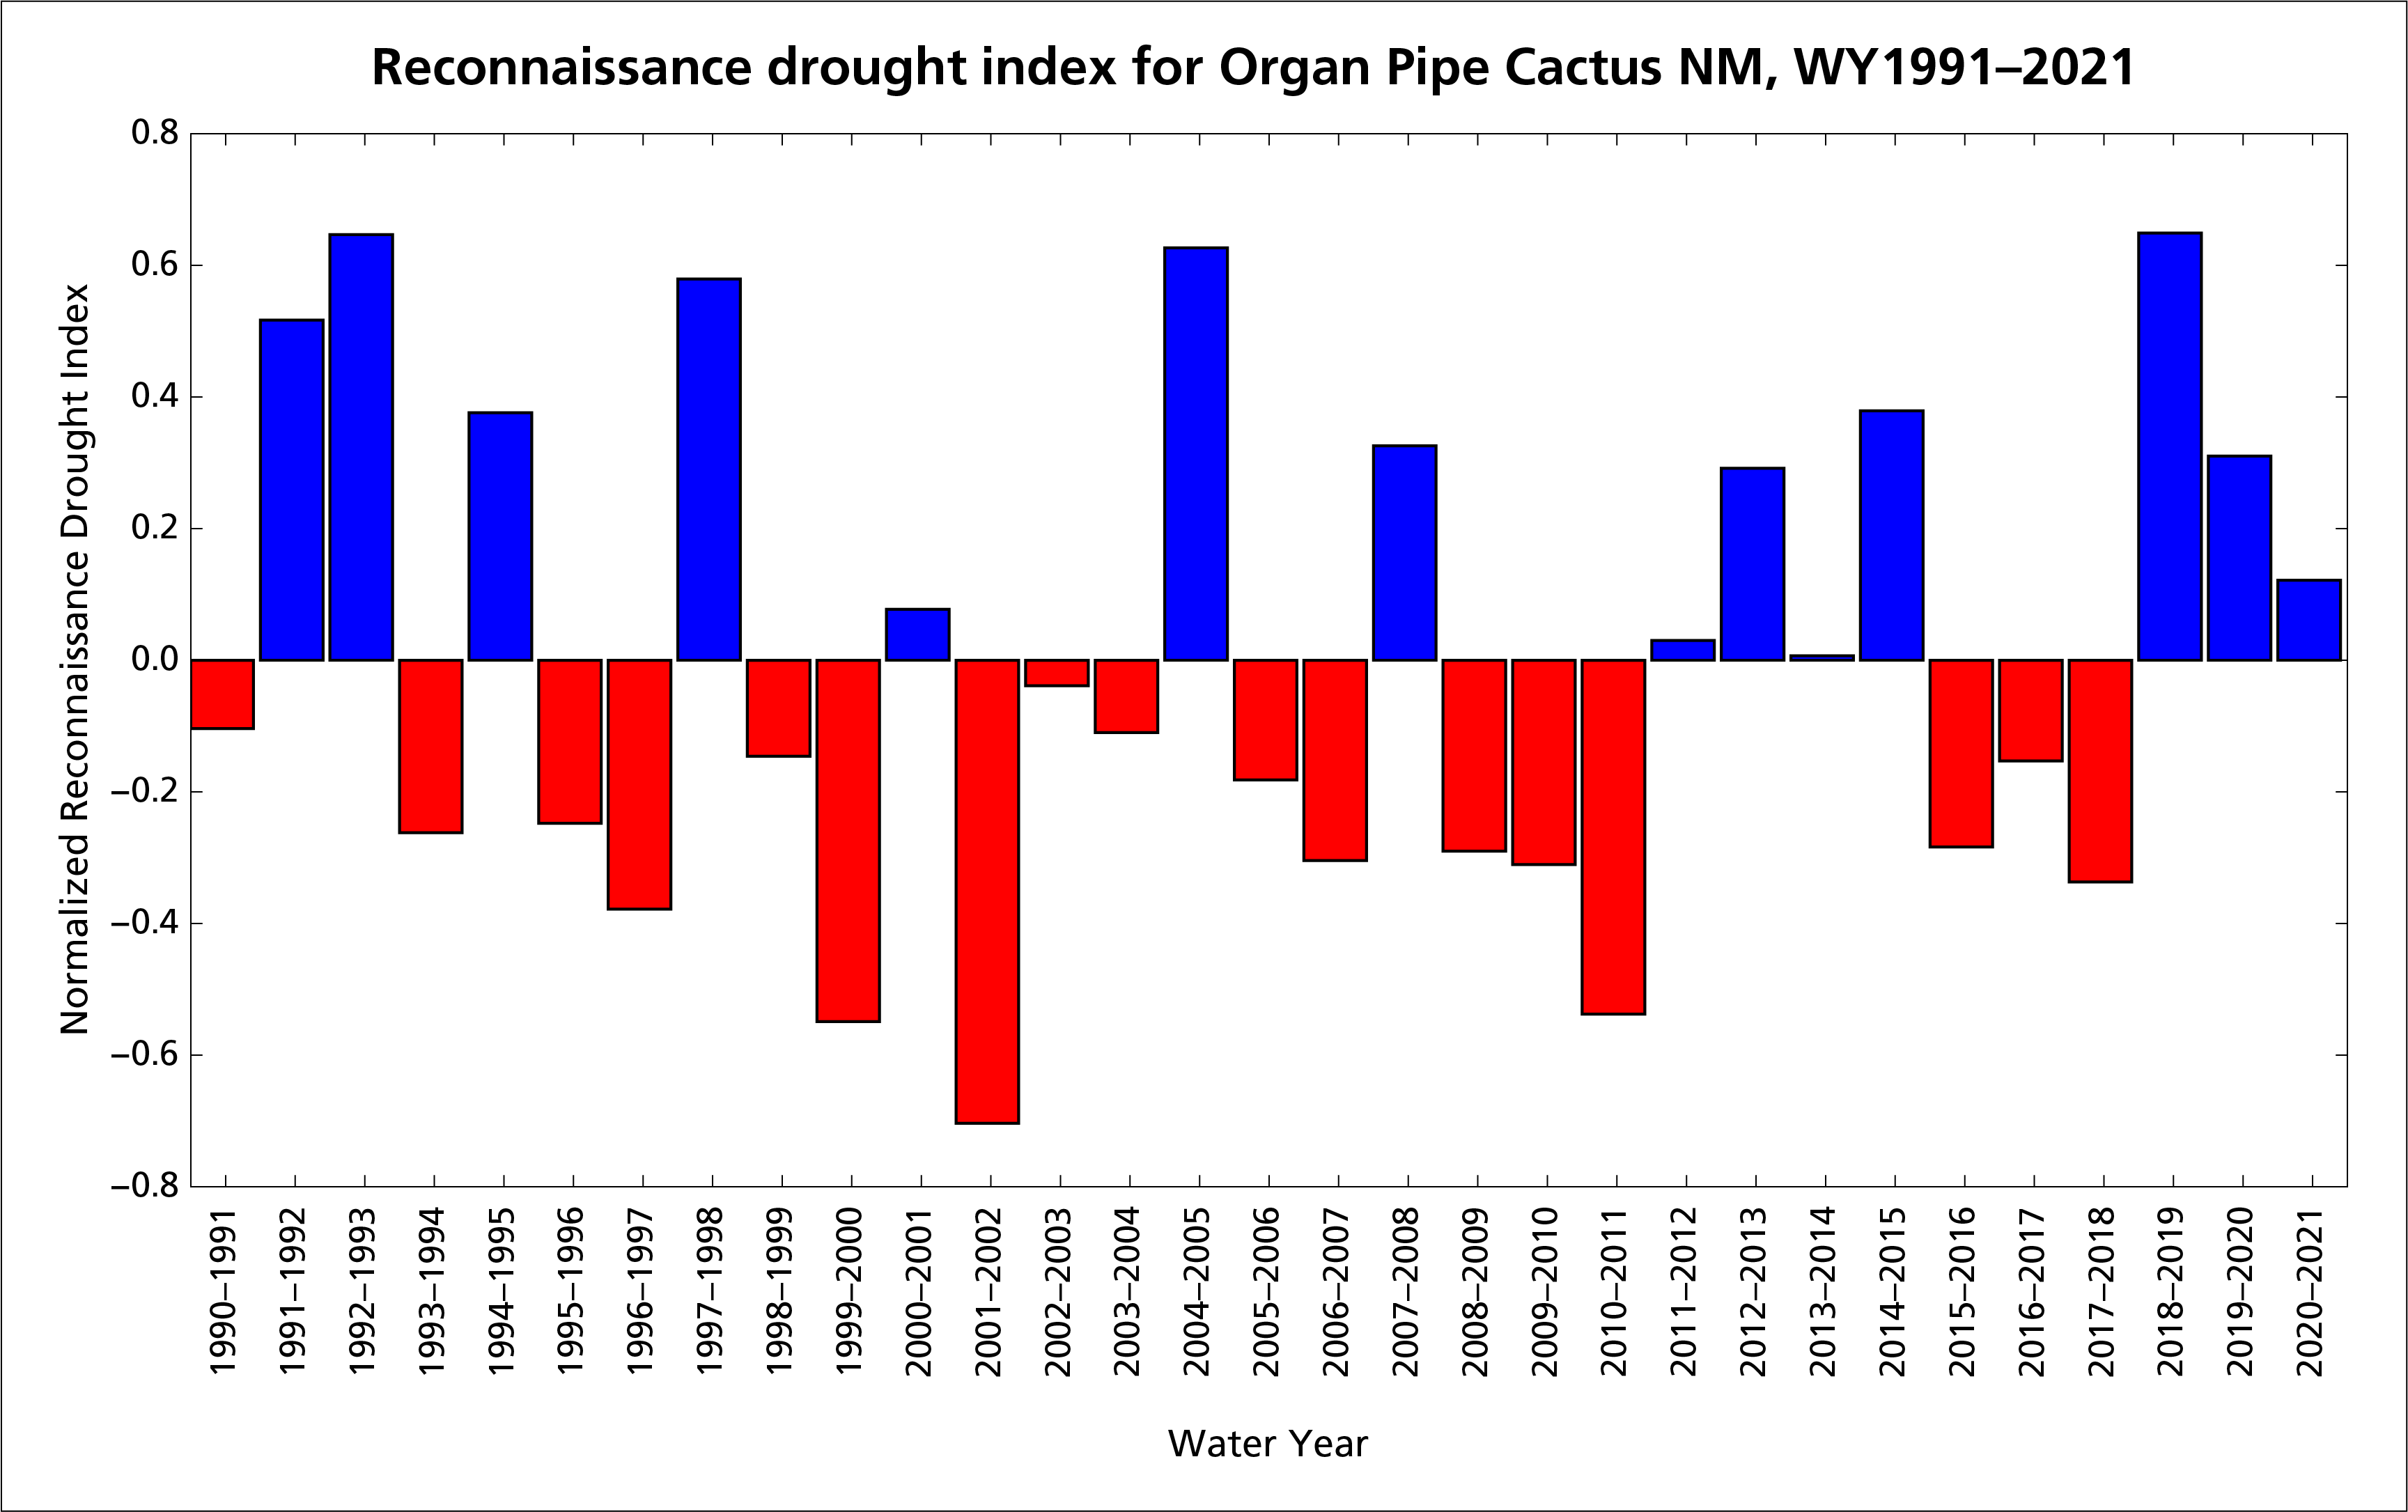 Bar graph of values for reconnaissance drought index ranging from ~-0.7 to 0.7 across water years 1991-2021. Blue represents values above 0. Red represents values below 0. There are more red bars than blue.